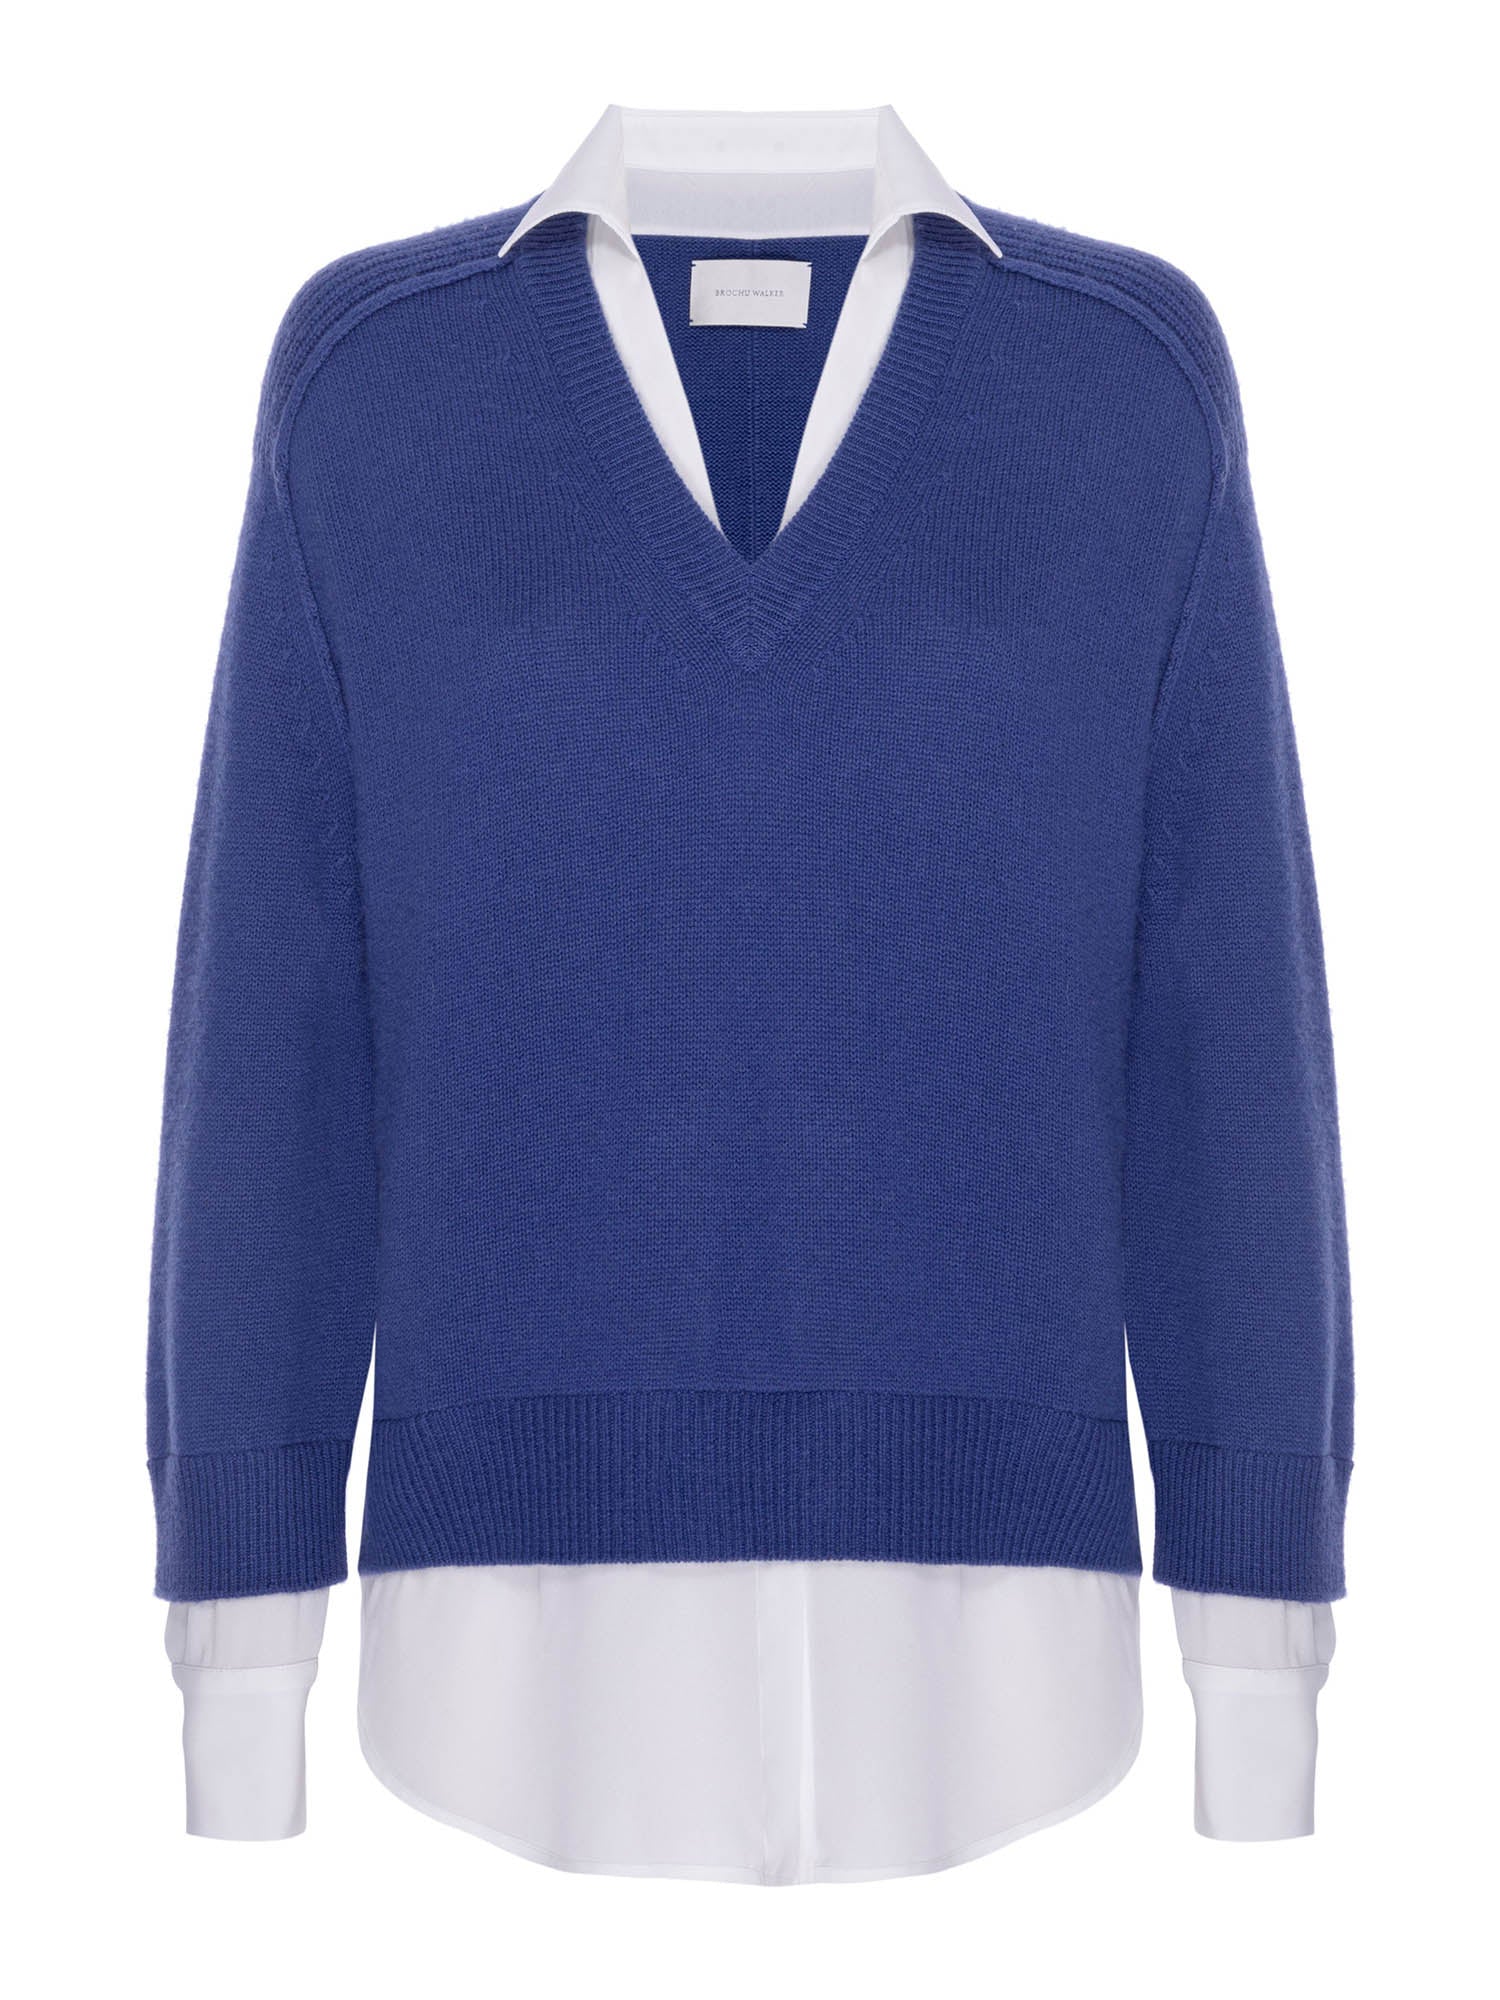 Looker blue layered v-neck sweater flat view